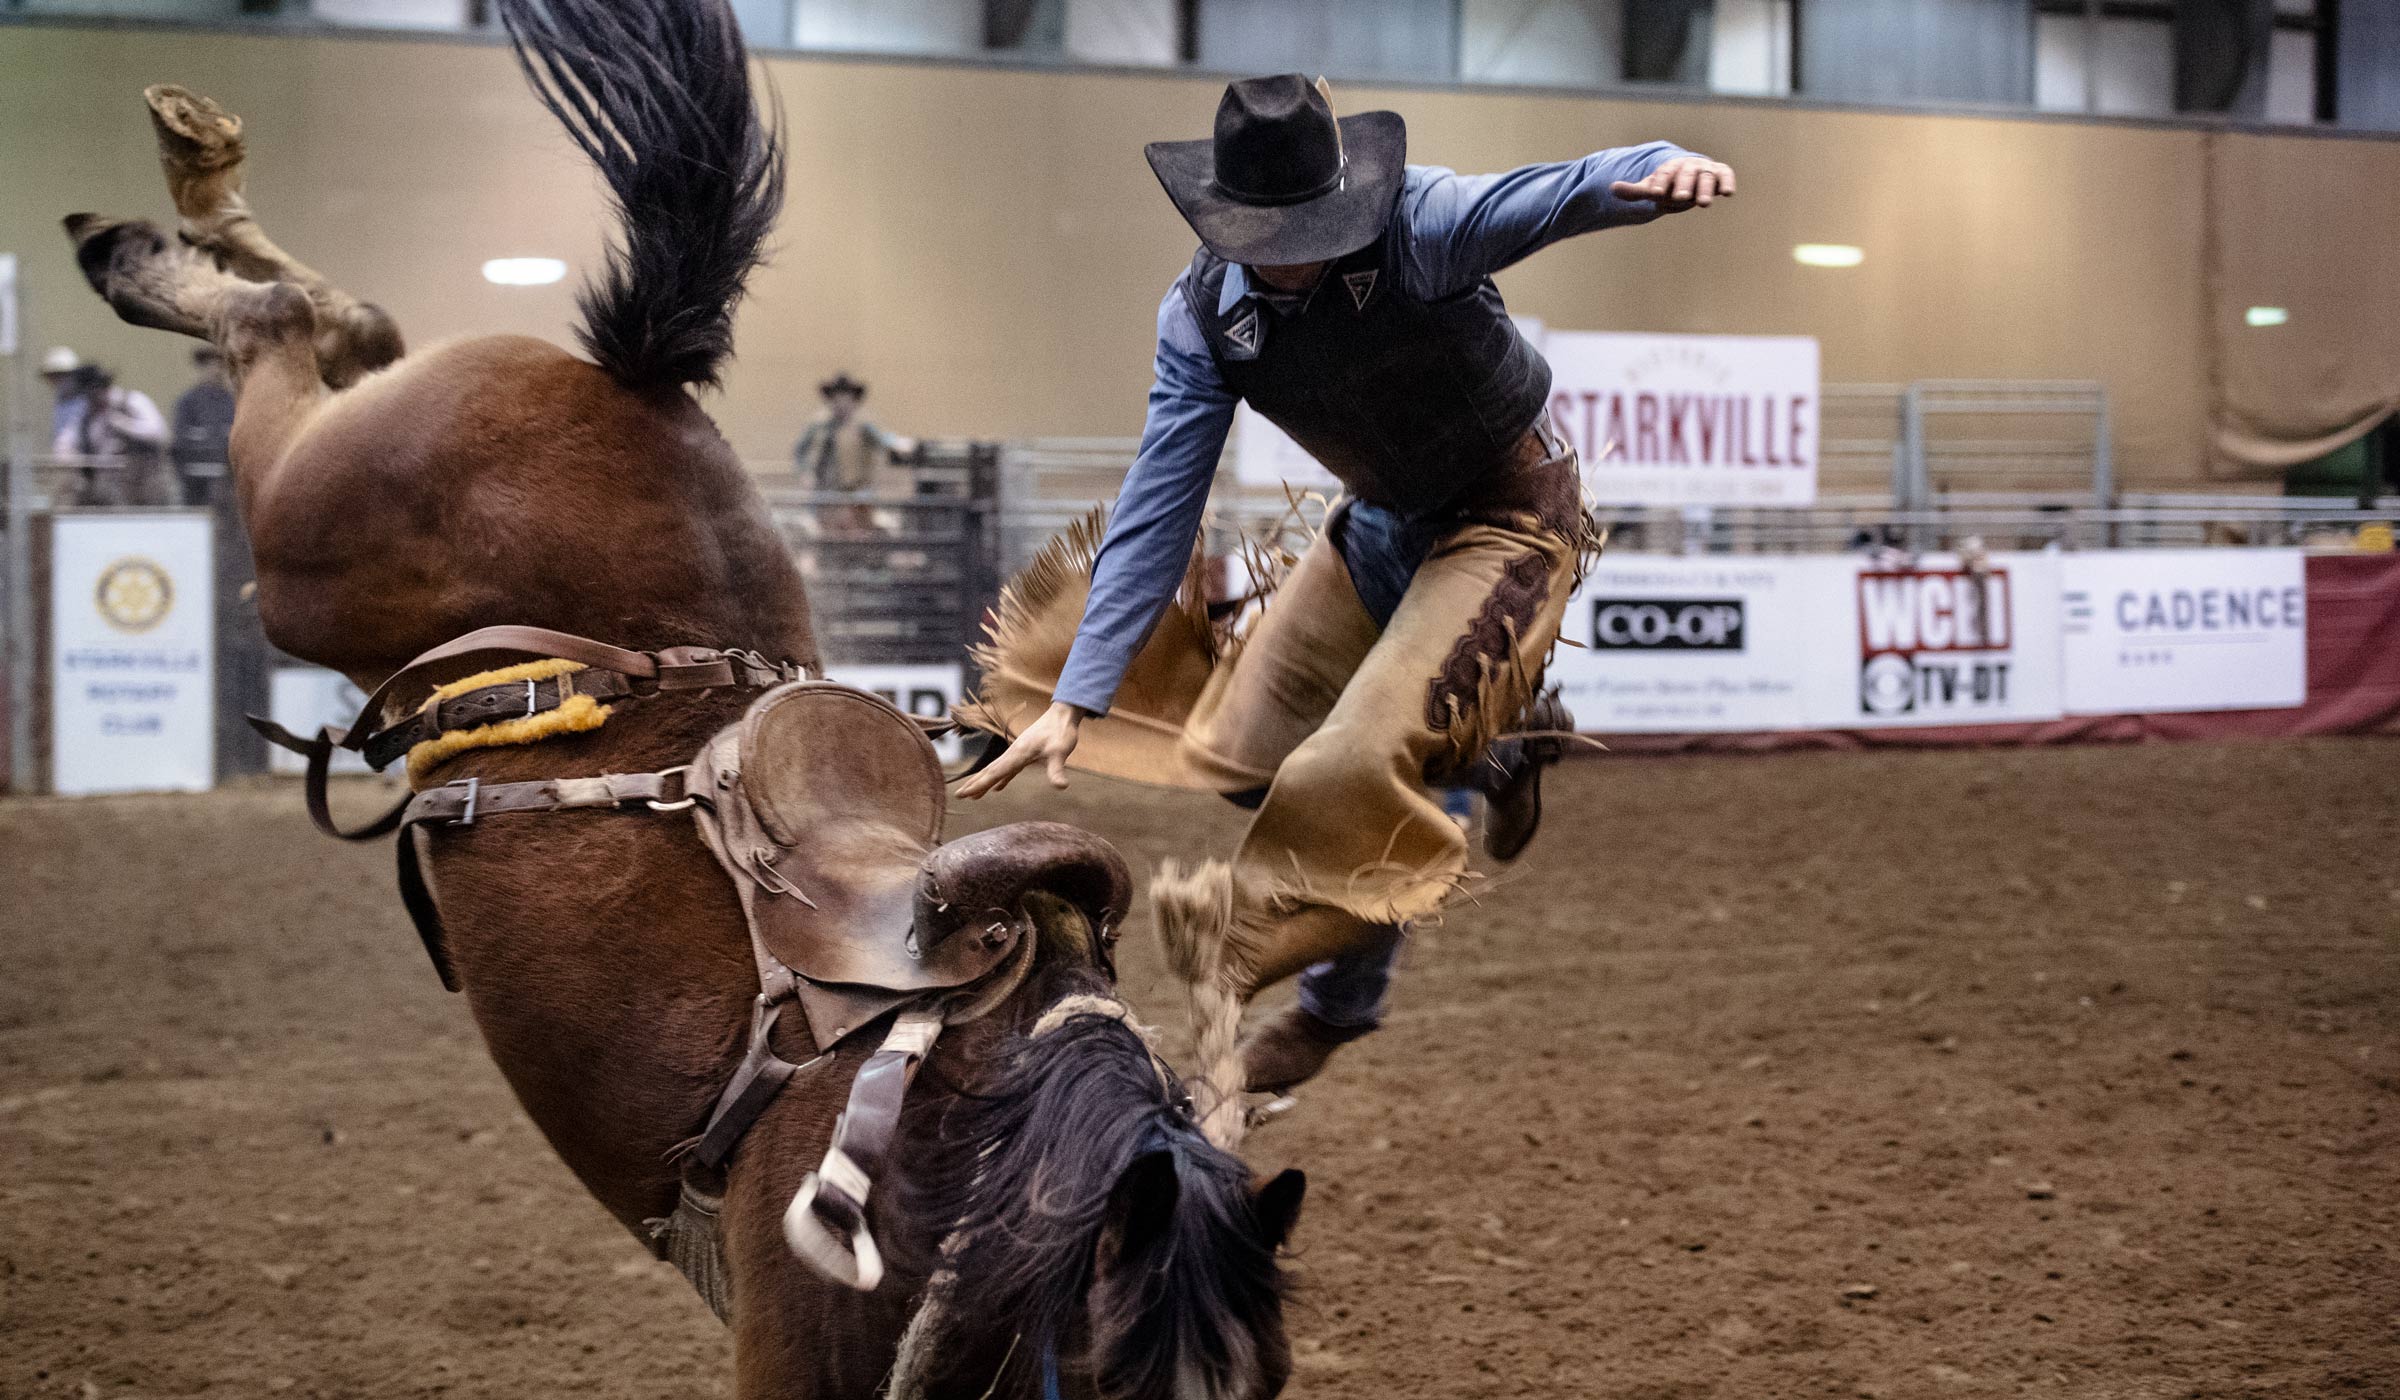 Tight photo of a rodeo cowboy being tossed off the side of a bucking bronco.